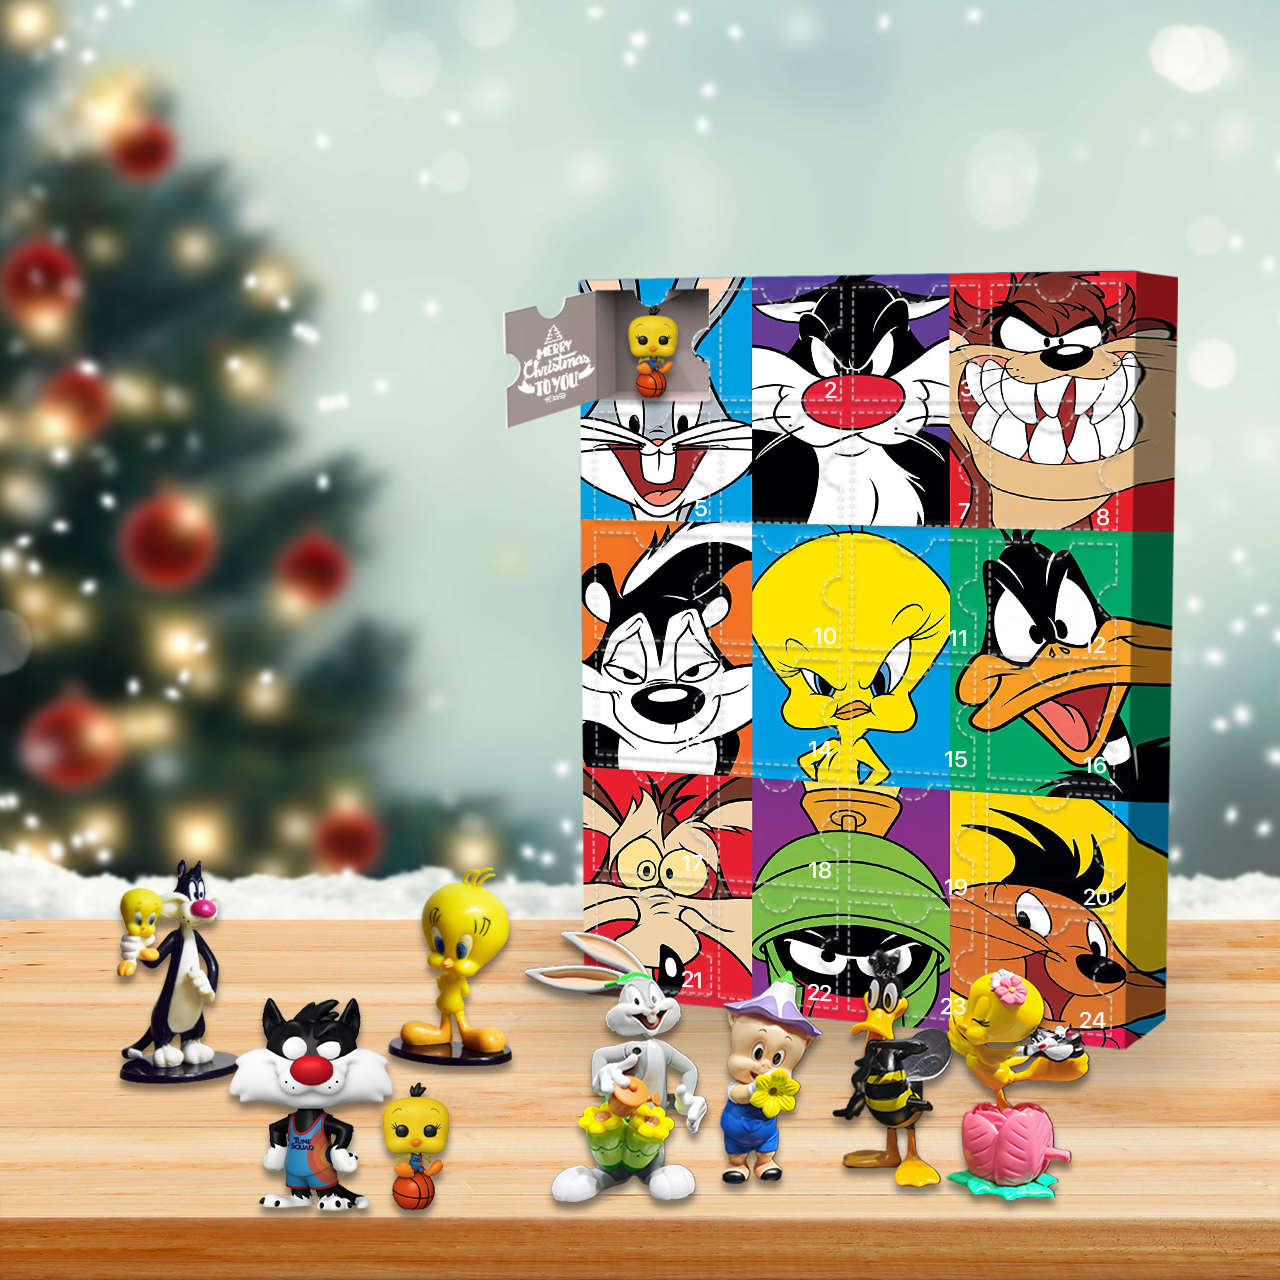 US$ 41.90 - Looney Tunes Advent Calendar 2021 -- The One With 24 Little